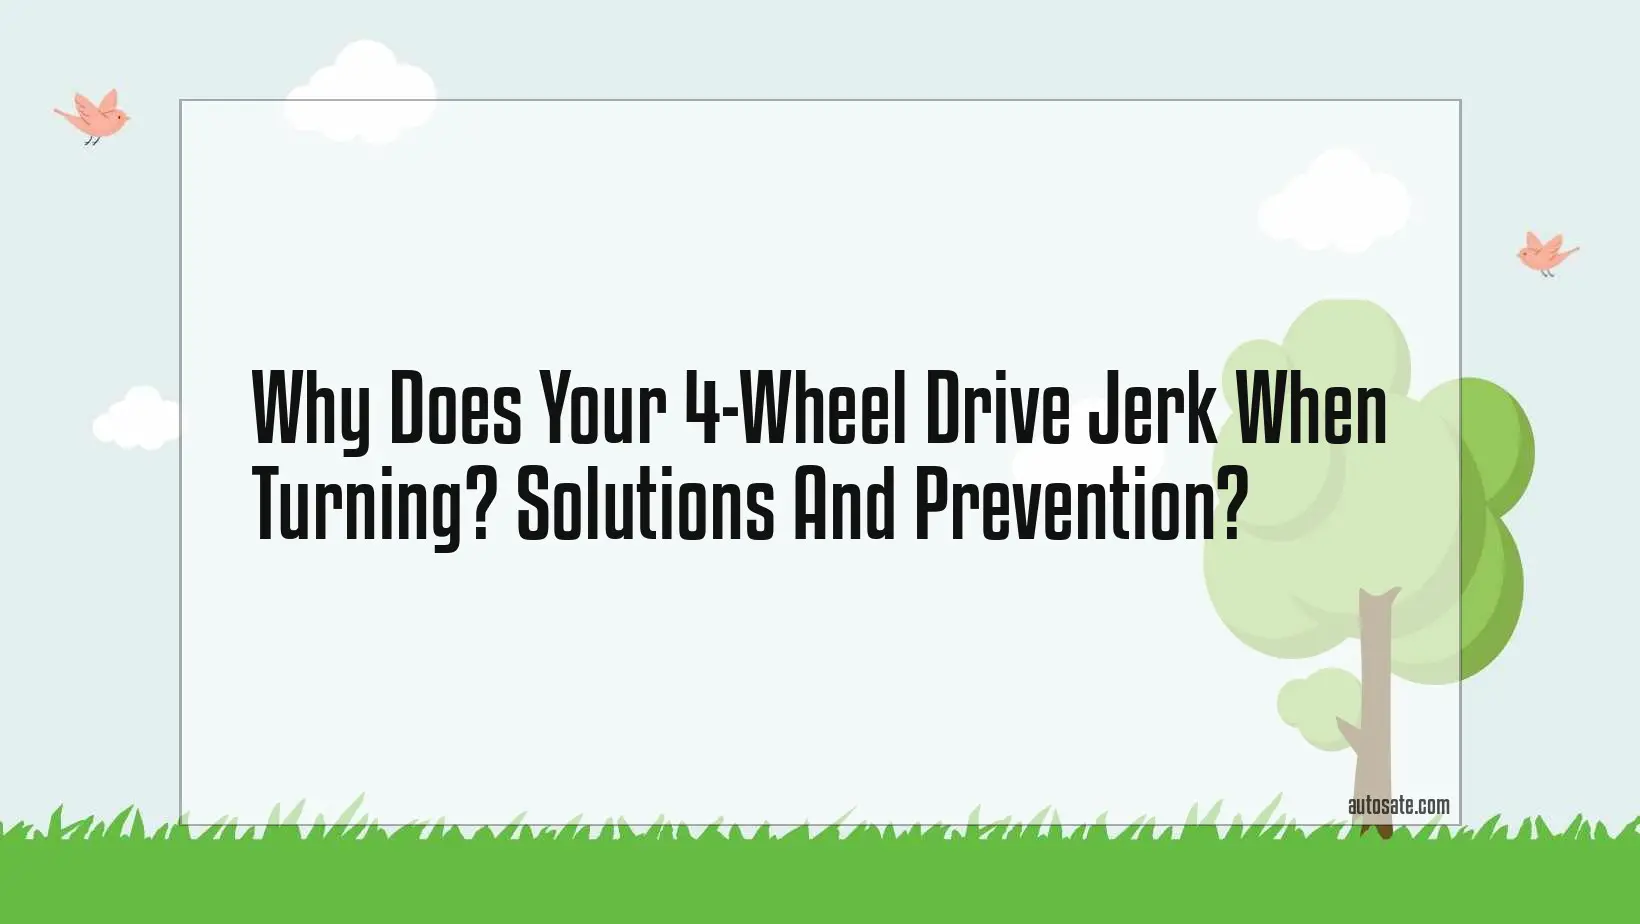 Why Does Your 4-Wheel Drive Jerk When Turning? Solutions And Prevention